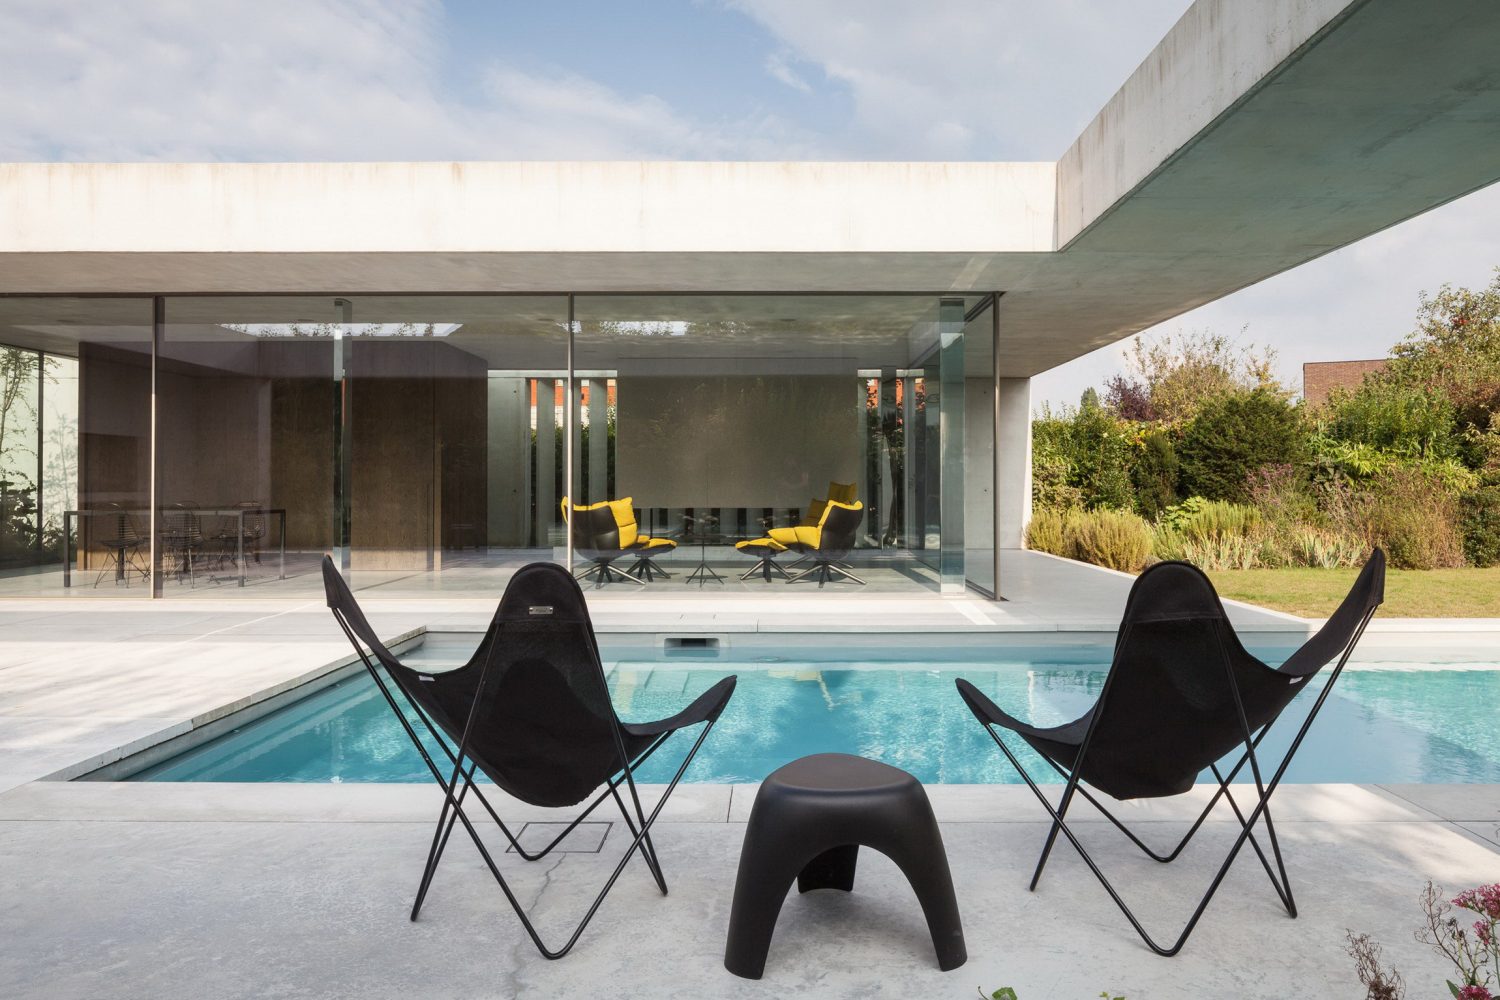 Poolhouse O by Steven Vandenborre Architects